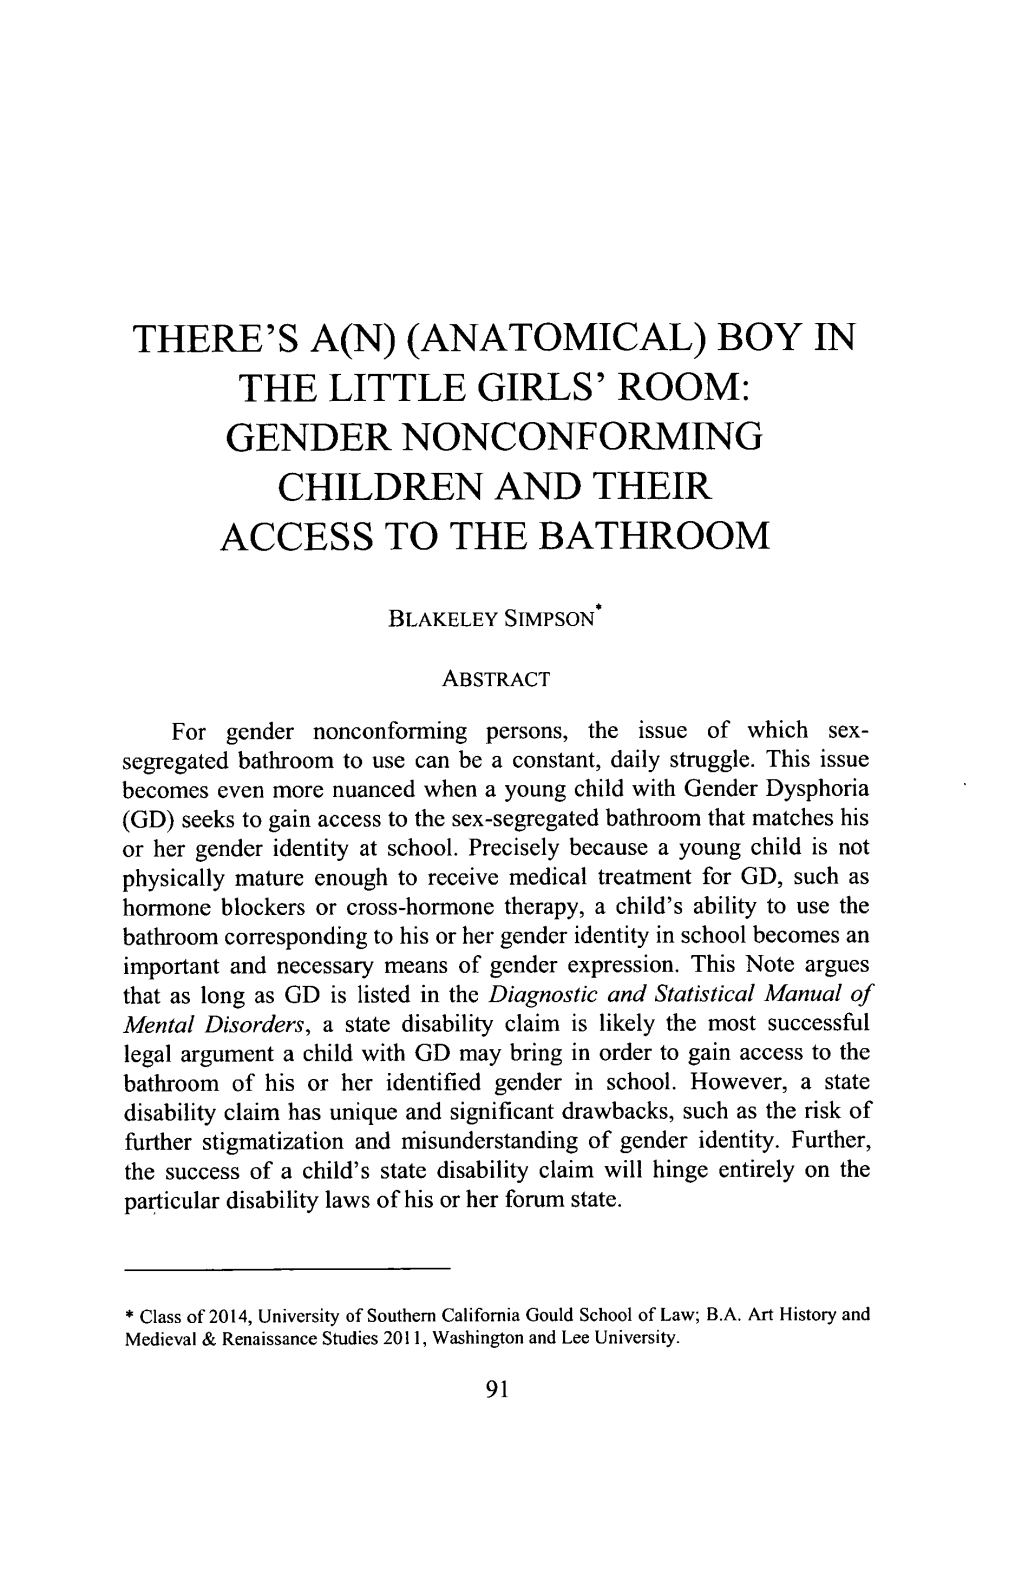 Boy in the Little Girls' Room: Gender Nonconforming Children and Their Access to the Bathroom